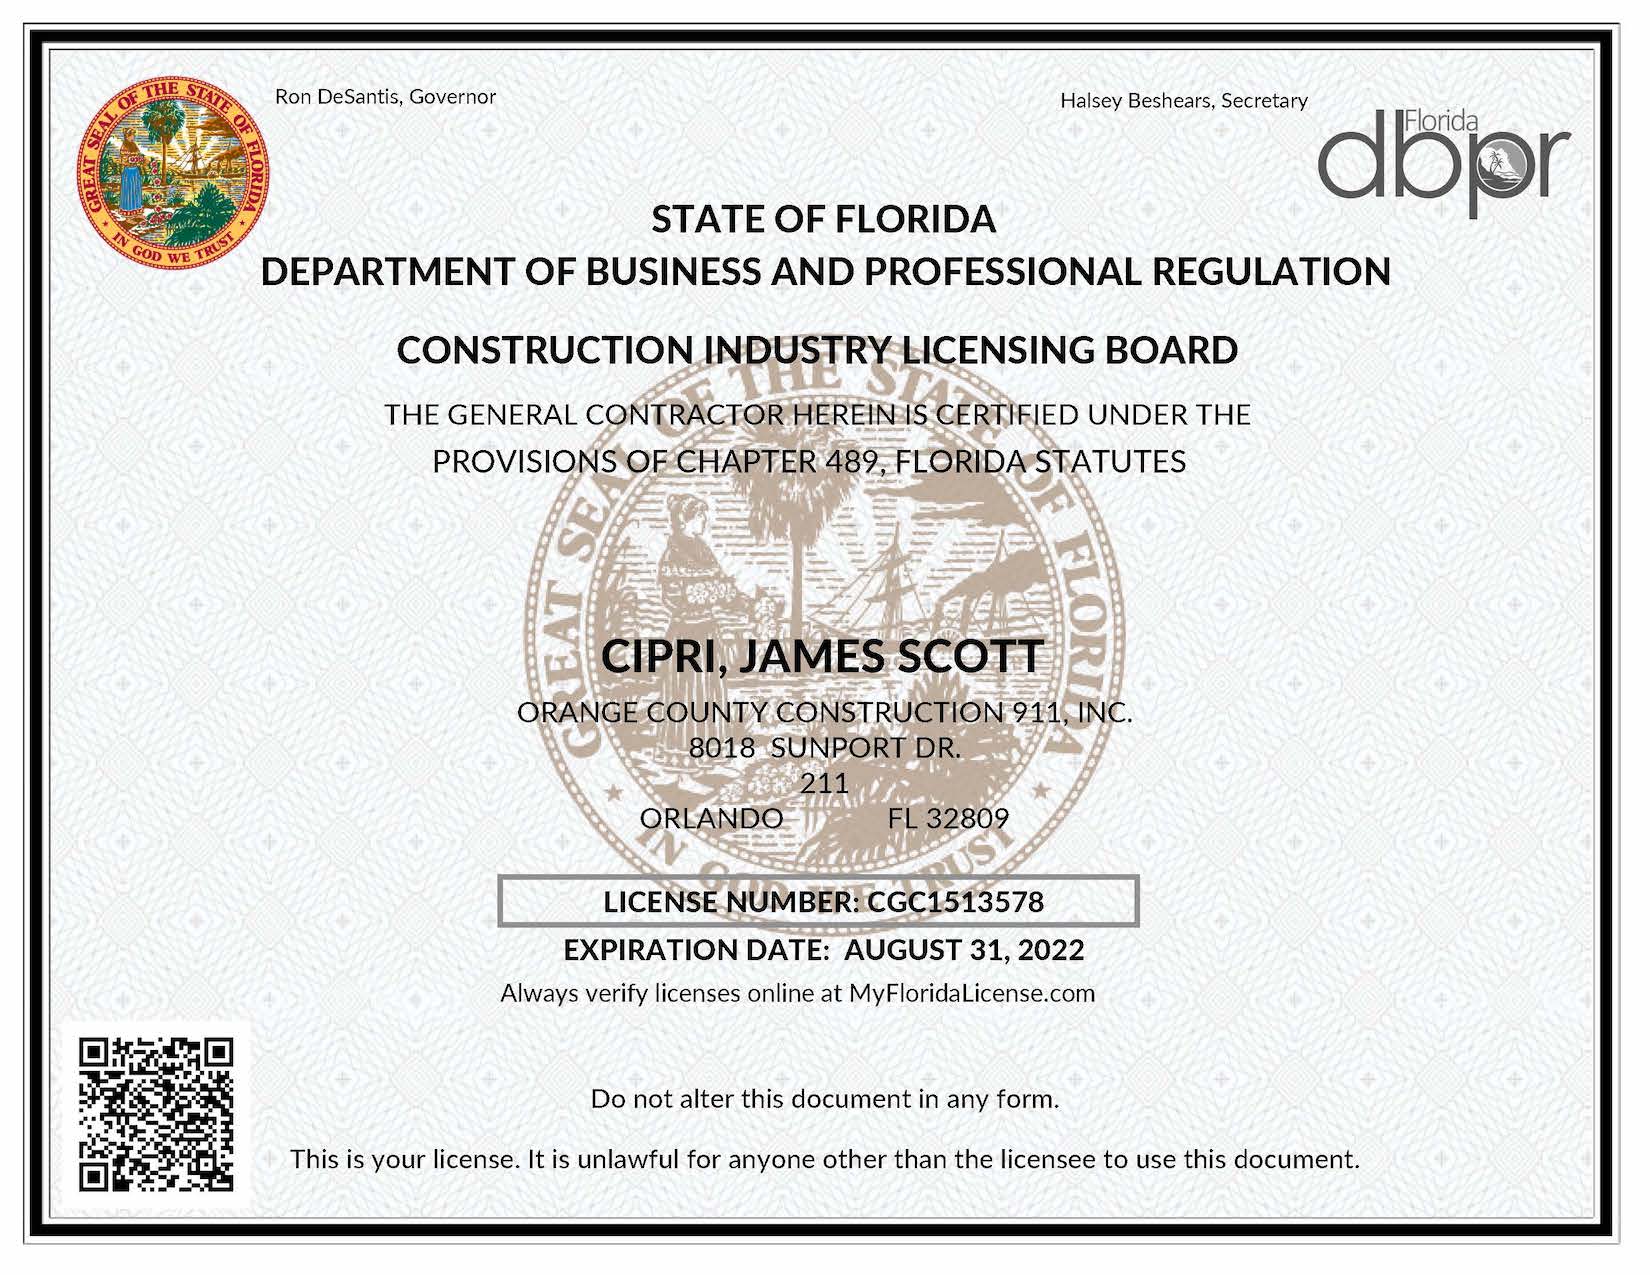 OCC911 General Contractor Licence - CGC Thru Aug 2022